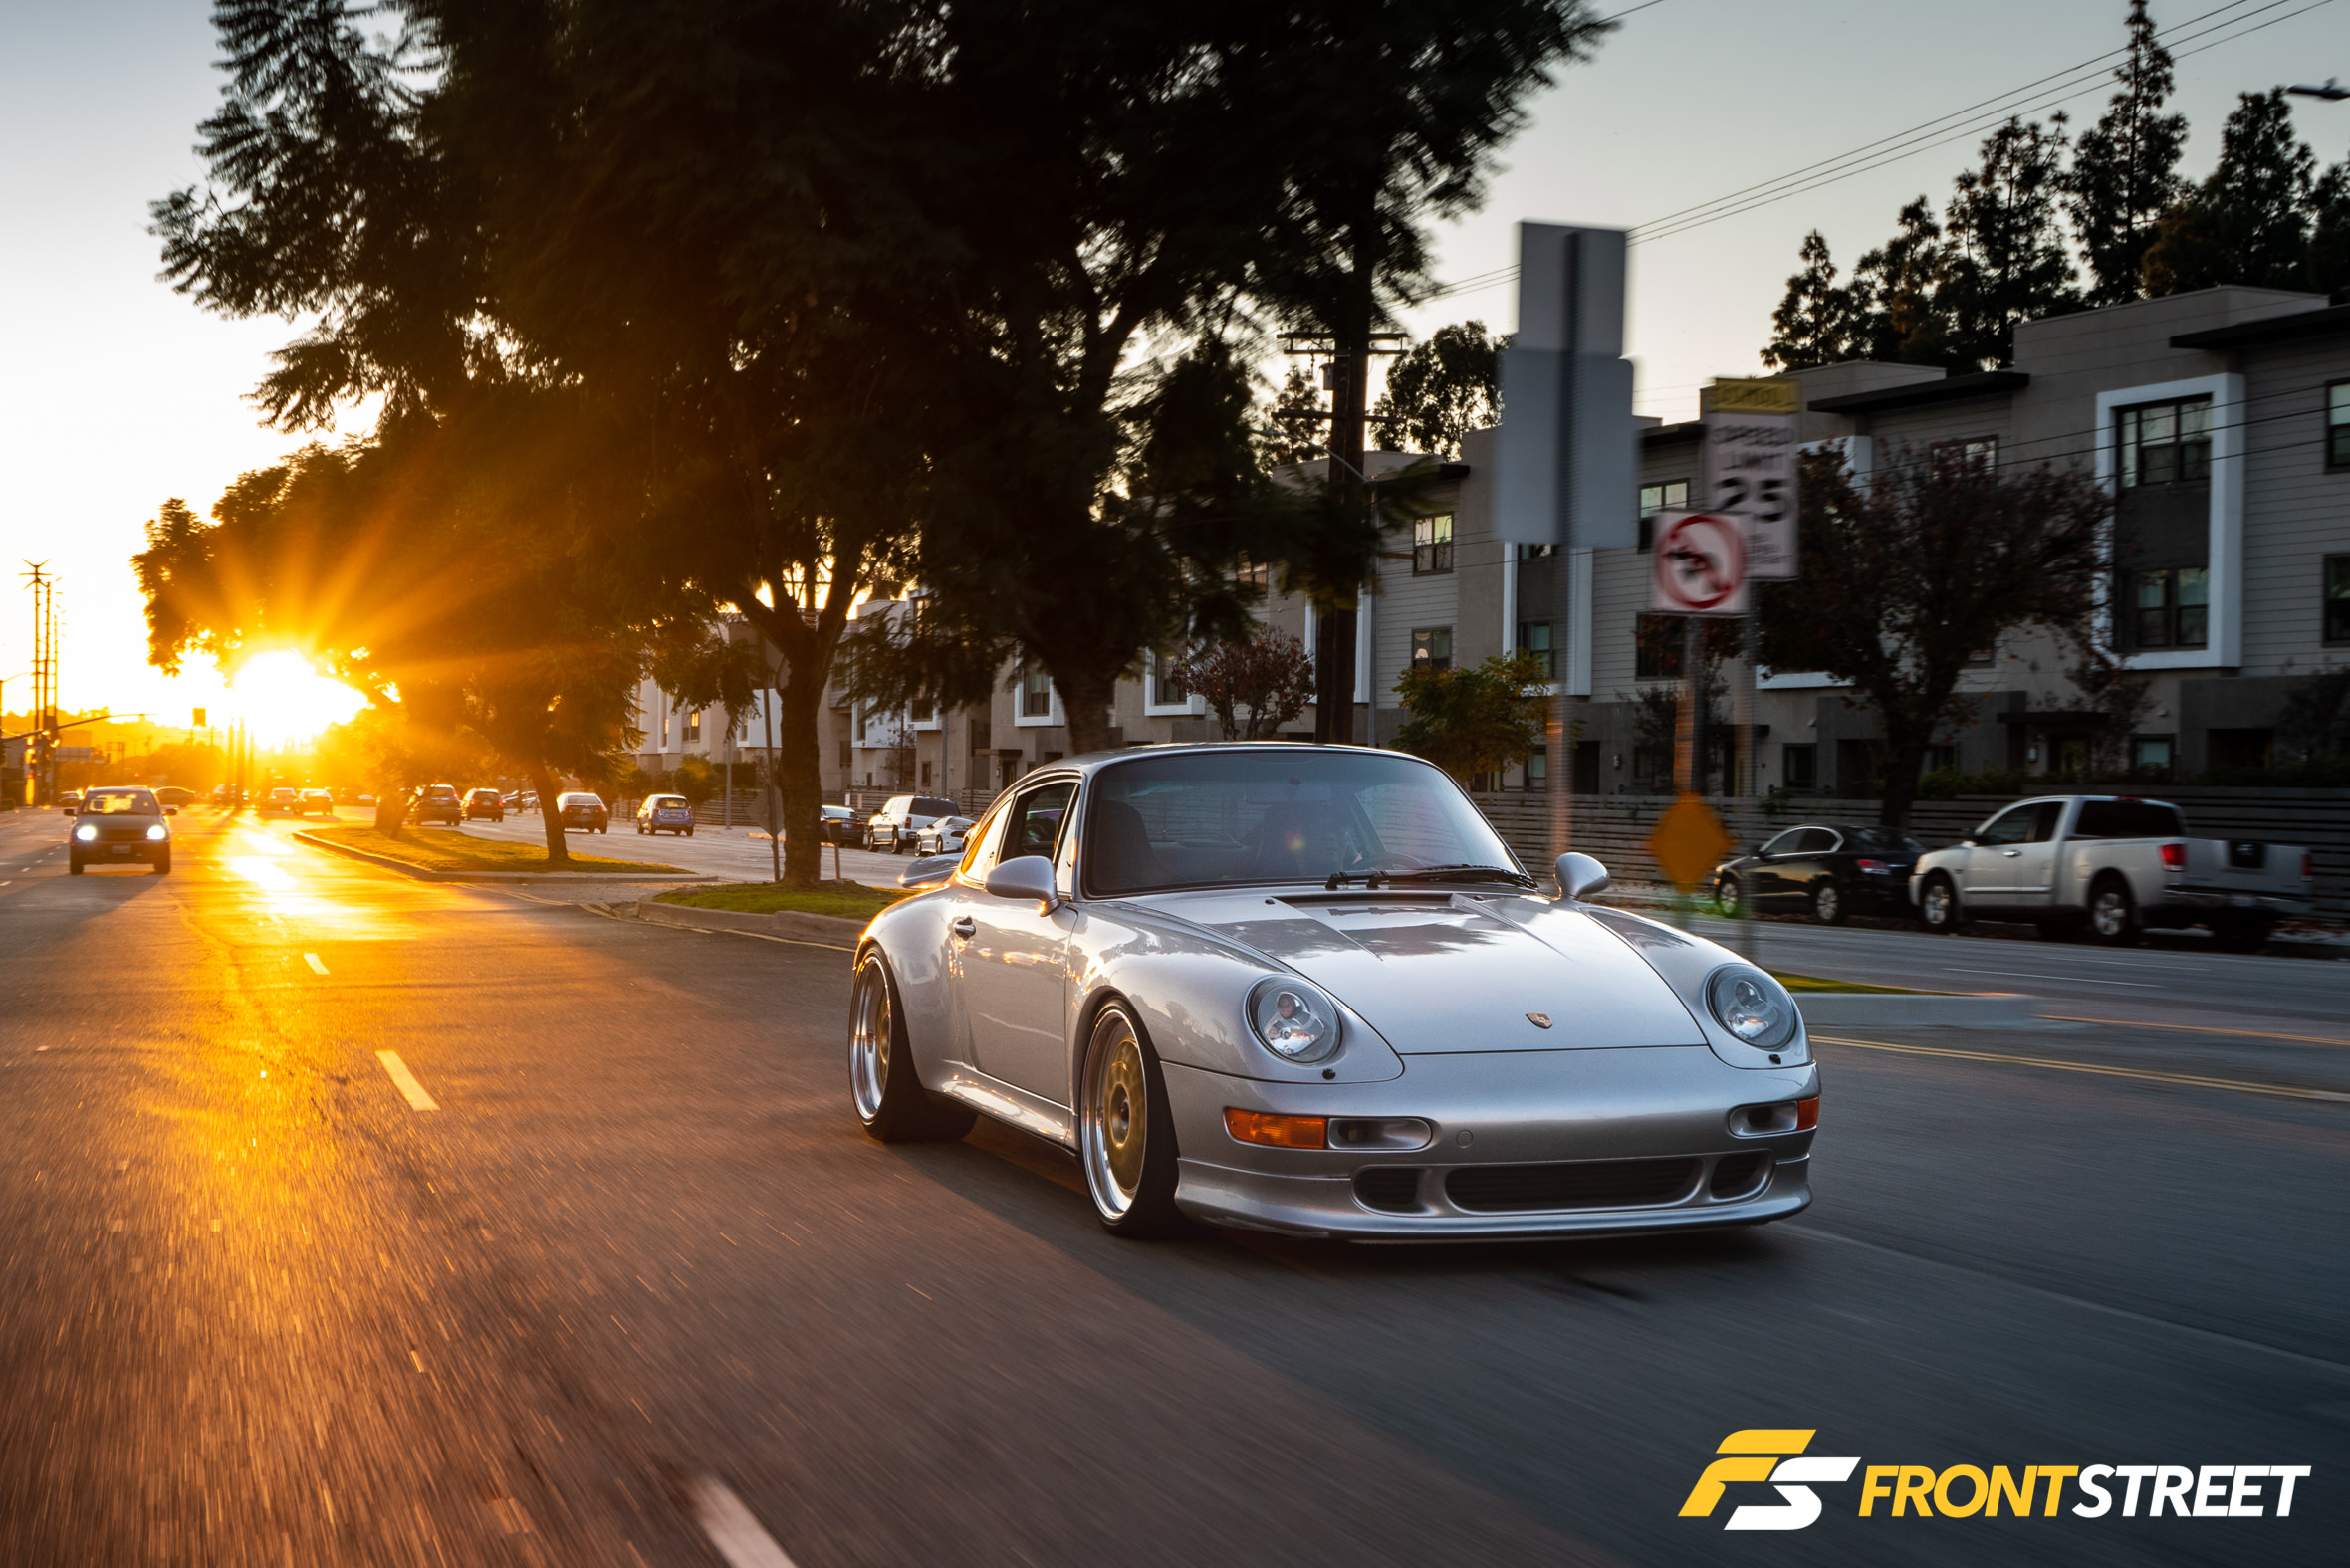 Last Of The Air-Cooled: Mike Truong's Porsche 911 Carrera 4S